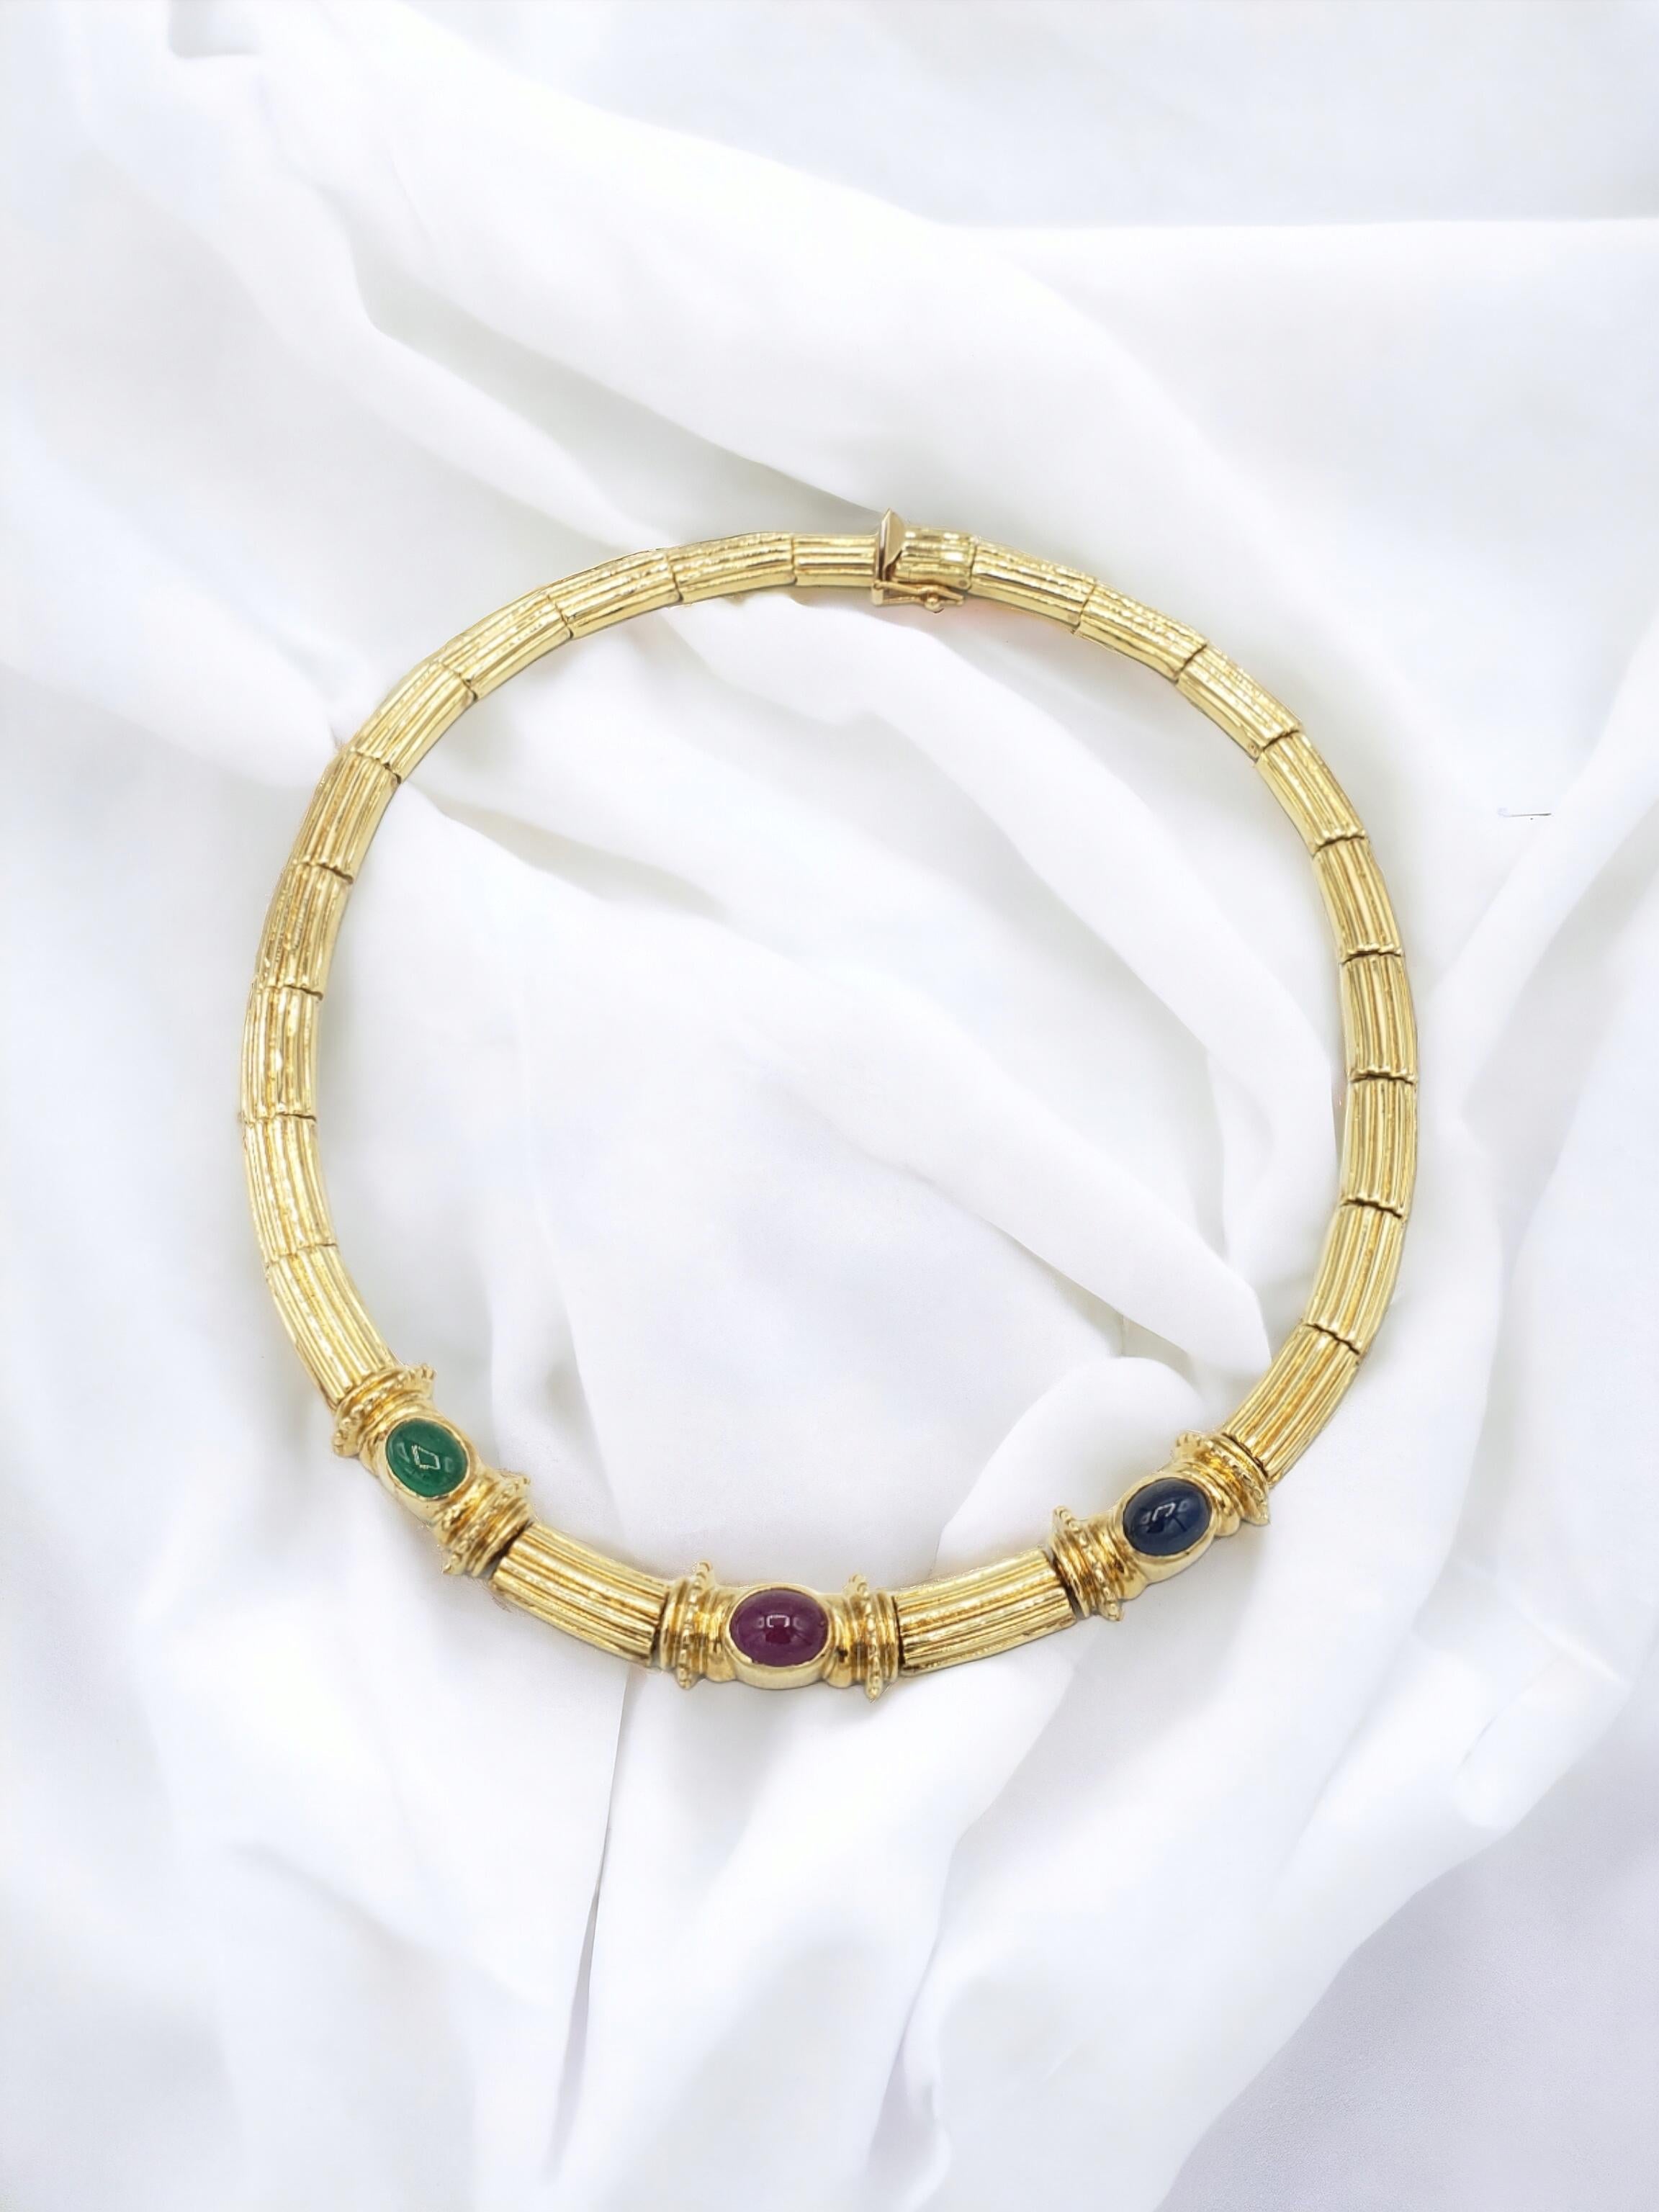 NEW Natural Ruby Sapphire Emerald Necklace in 14K Solid Yellow Gold Wt. 52Grams For Sale 3